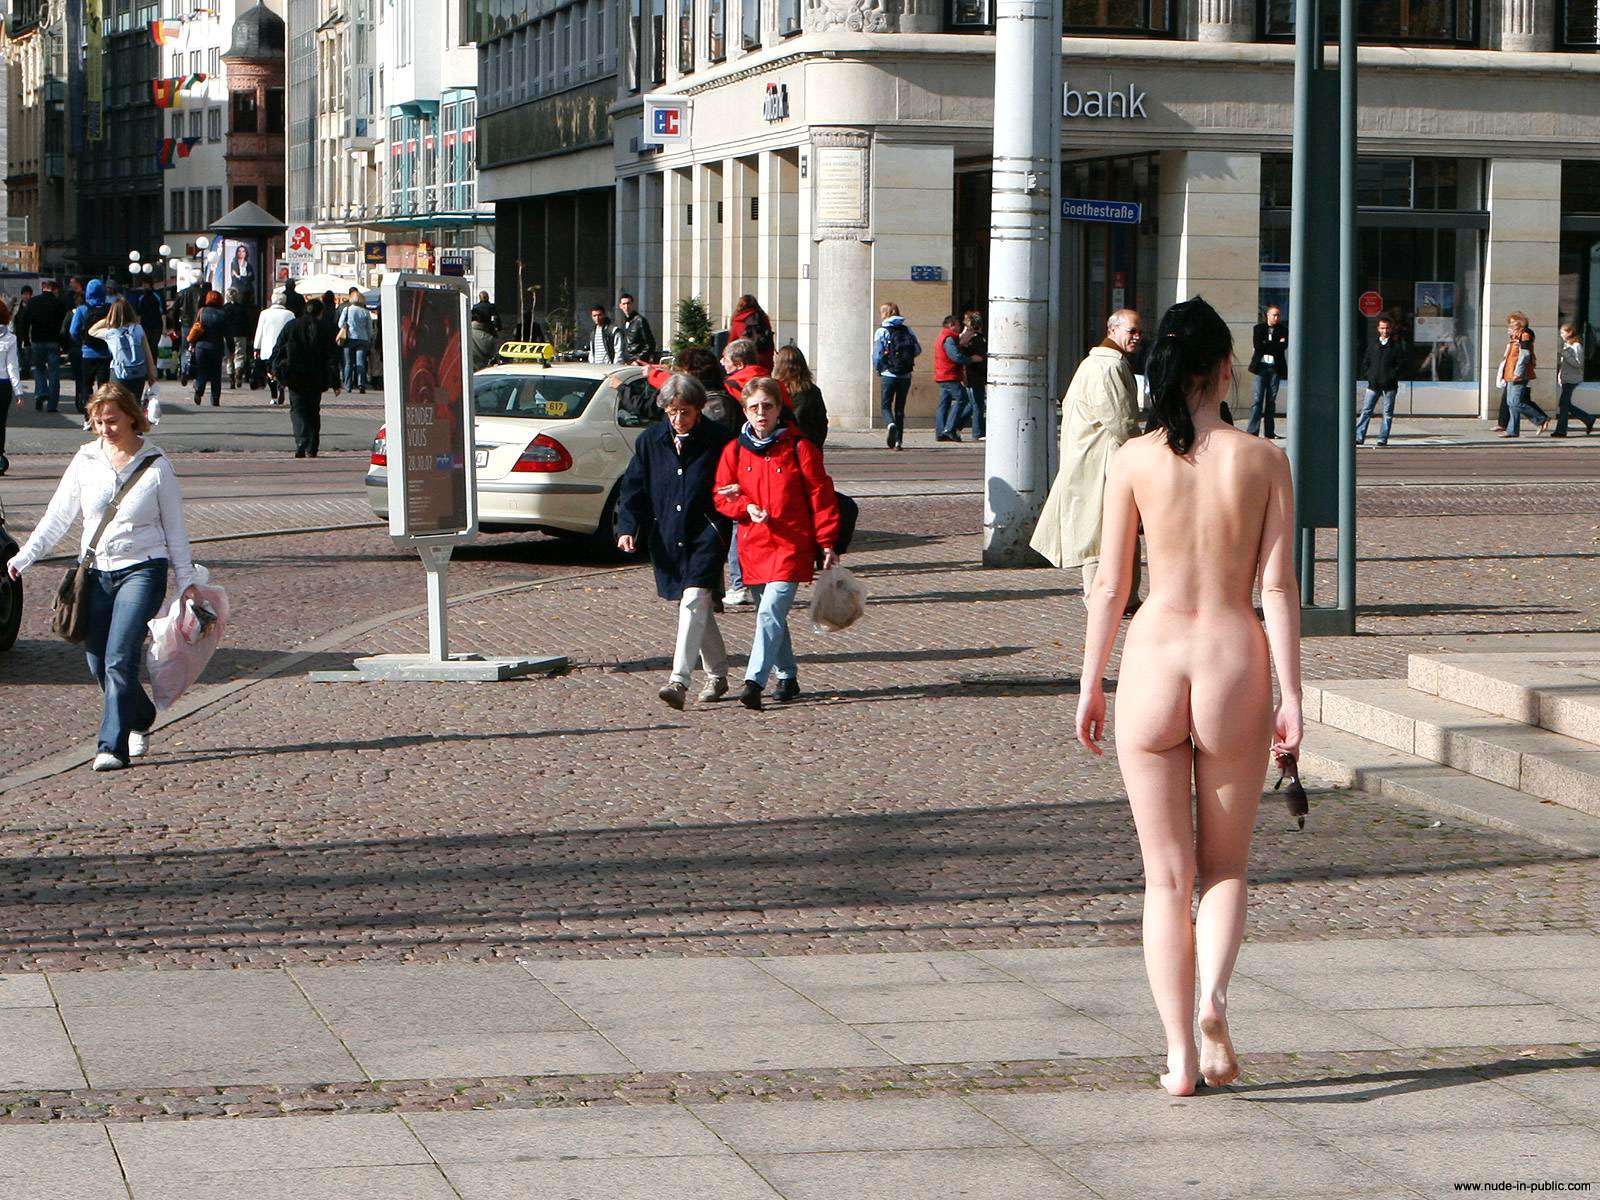 Are nudists also exhibitionists and voyeurs